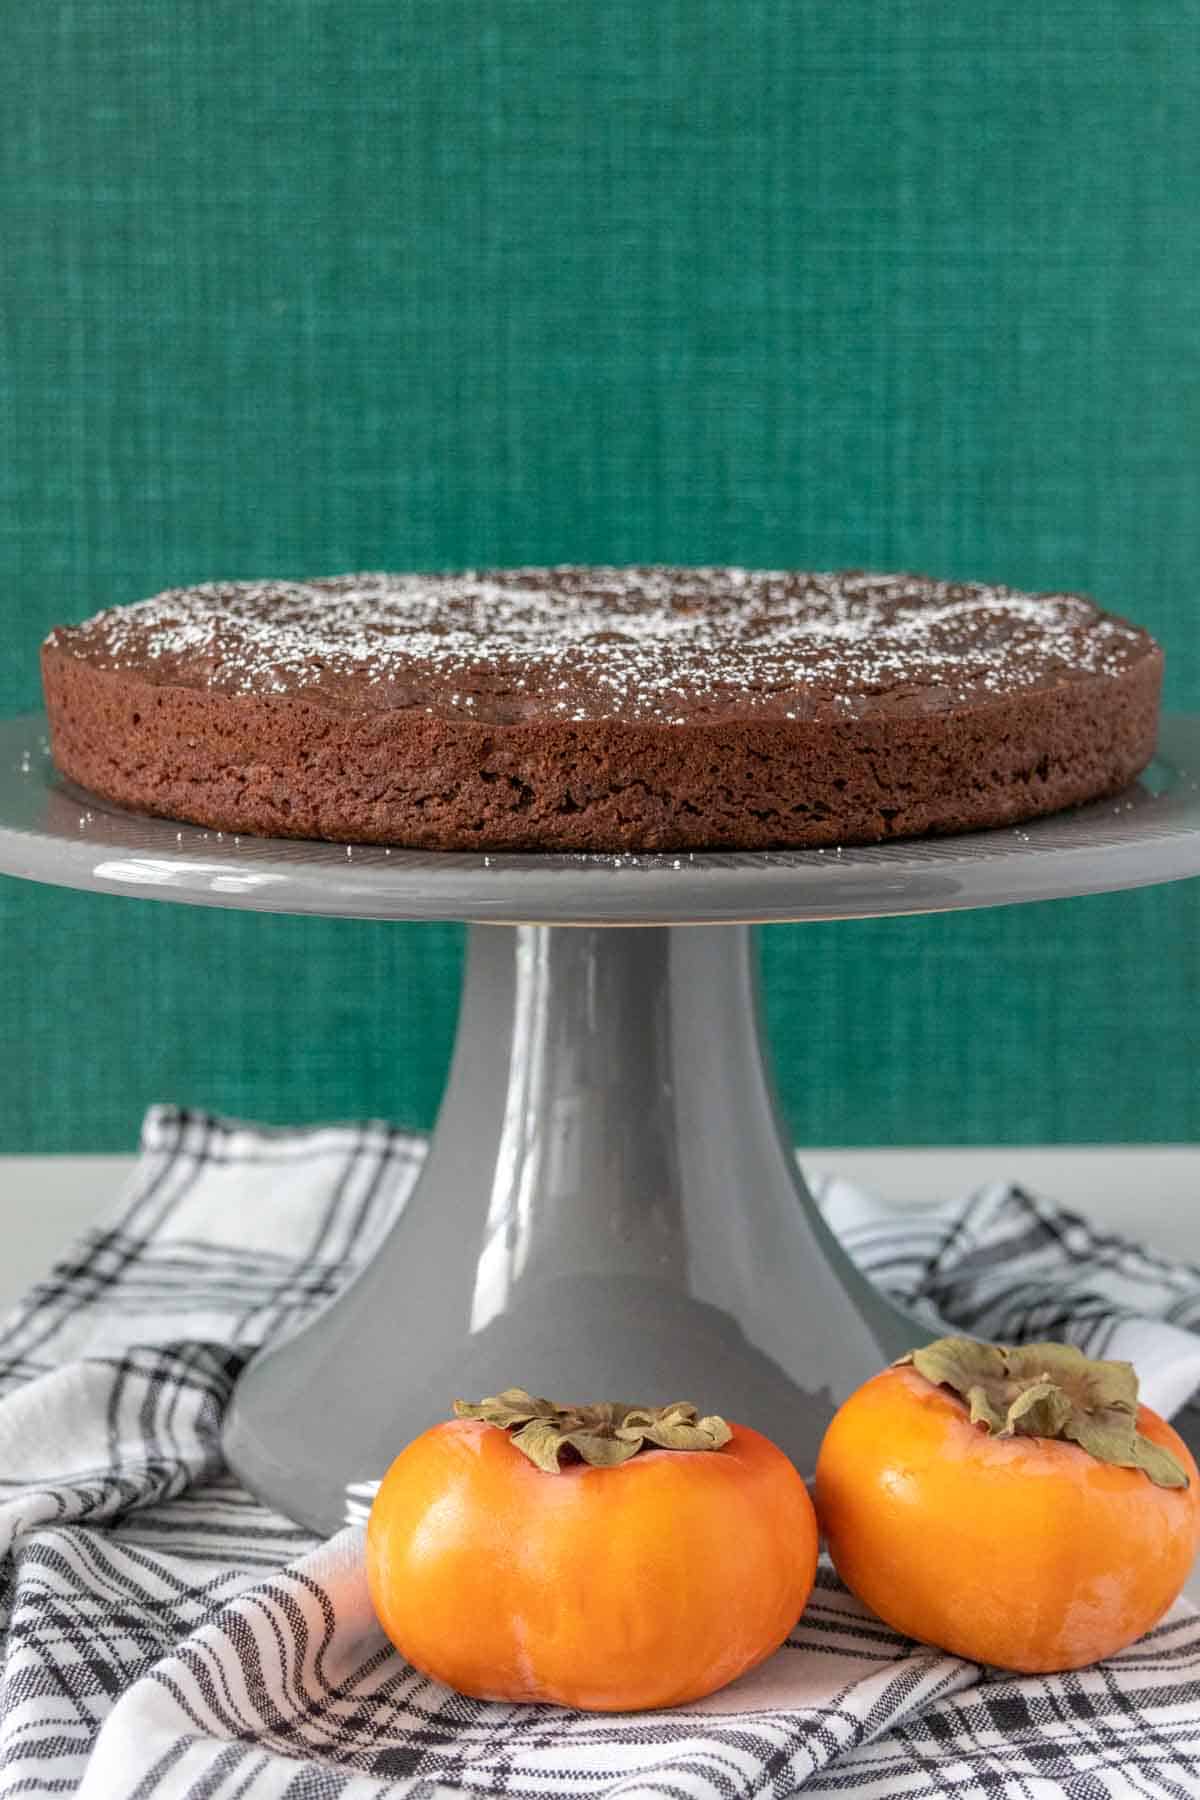 Chocolate persimmon cake on a gray cake stand.